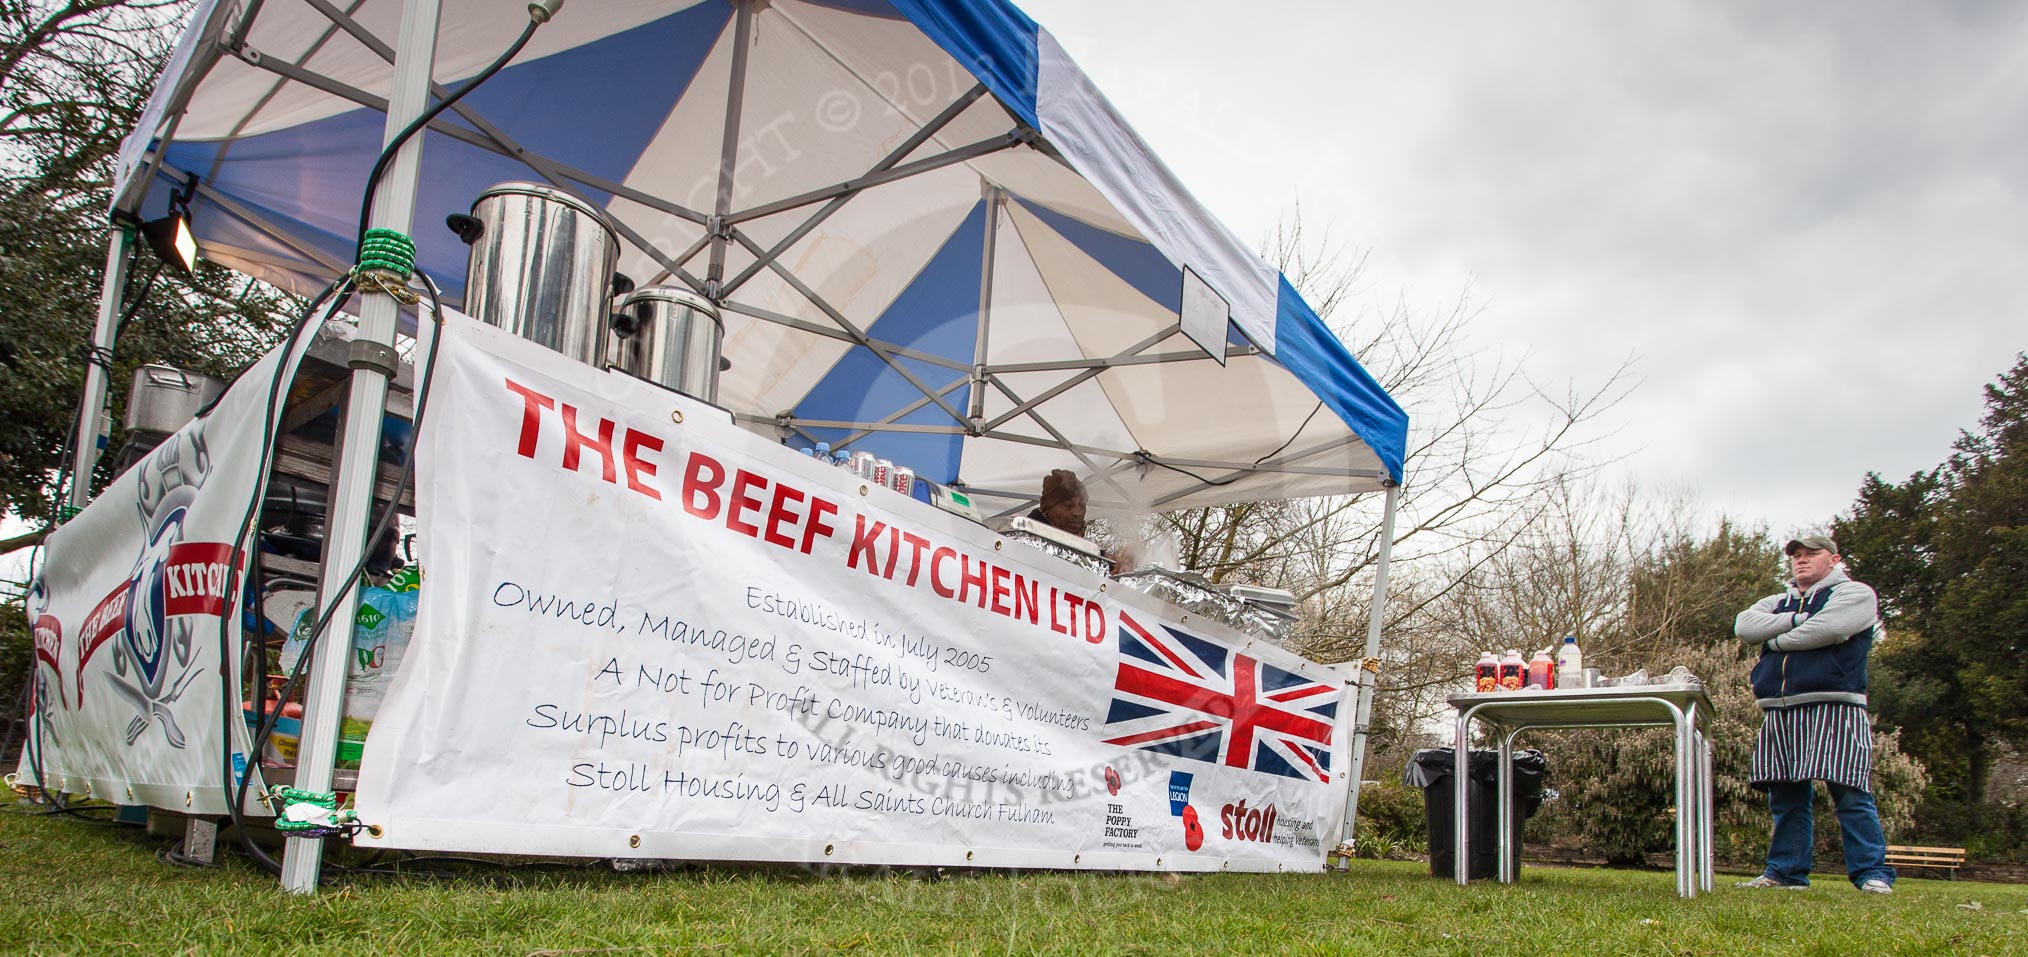 The Boat Race 2013: Boat Race catering with a difference - The Beef Kitchen Ltd, owned and staffed by veterans and volunteers..
Putney,
London SW15,

United Kingdom,
on 31 March 2013 at 11:41, image #30